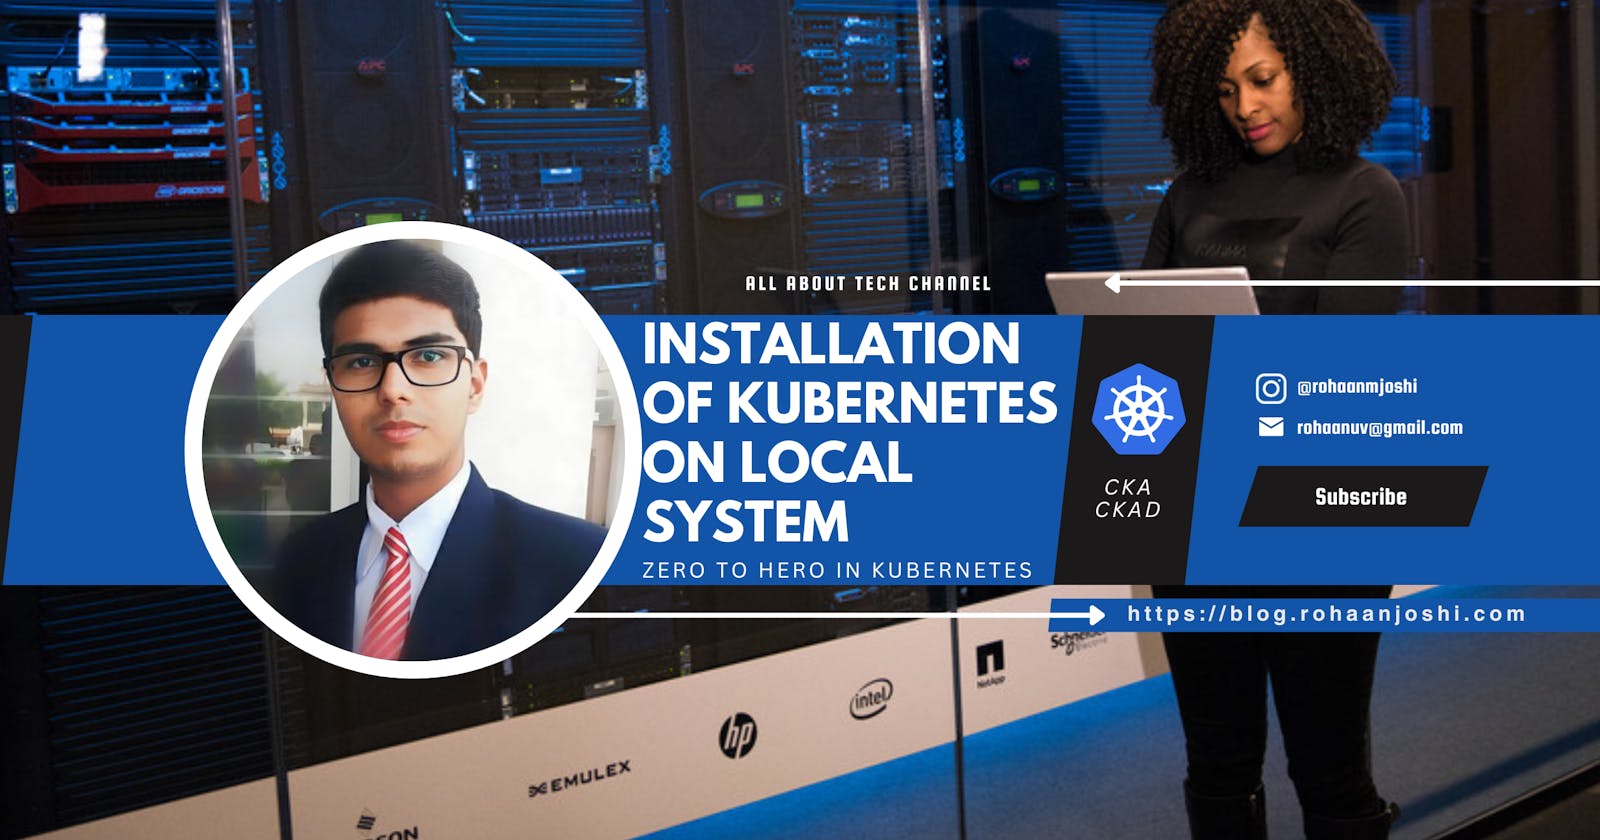 Installation of Kubernetes on Local System